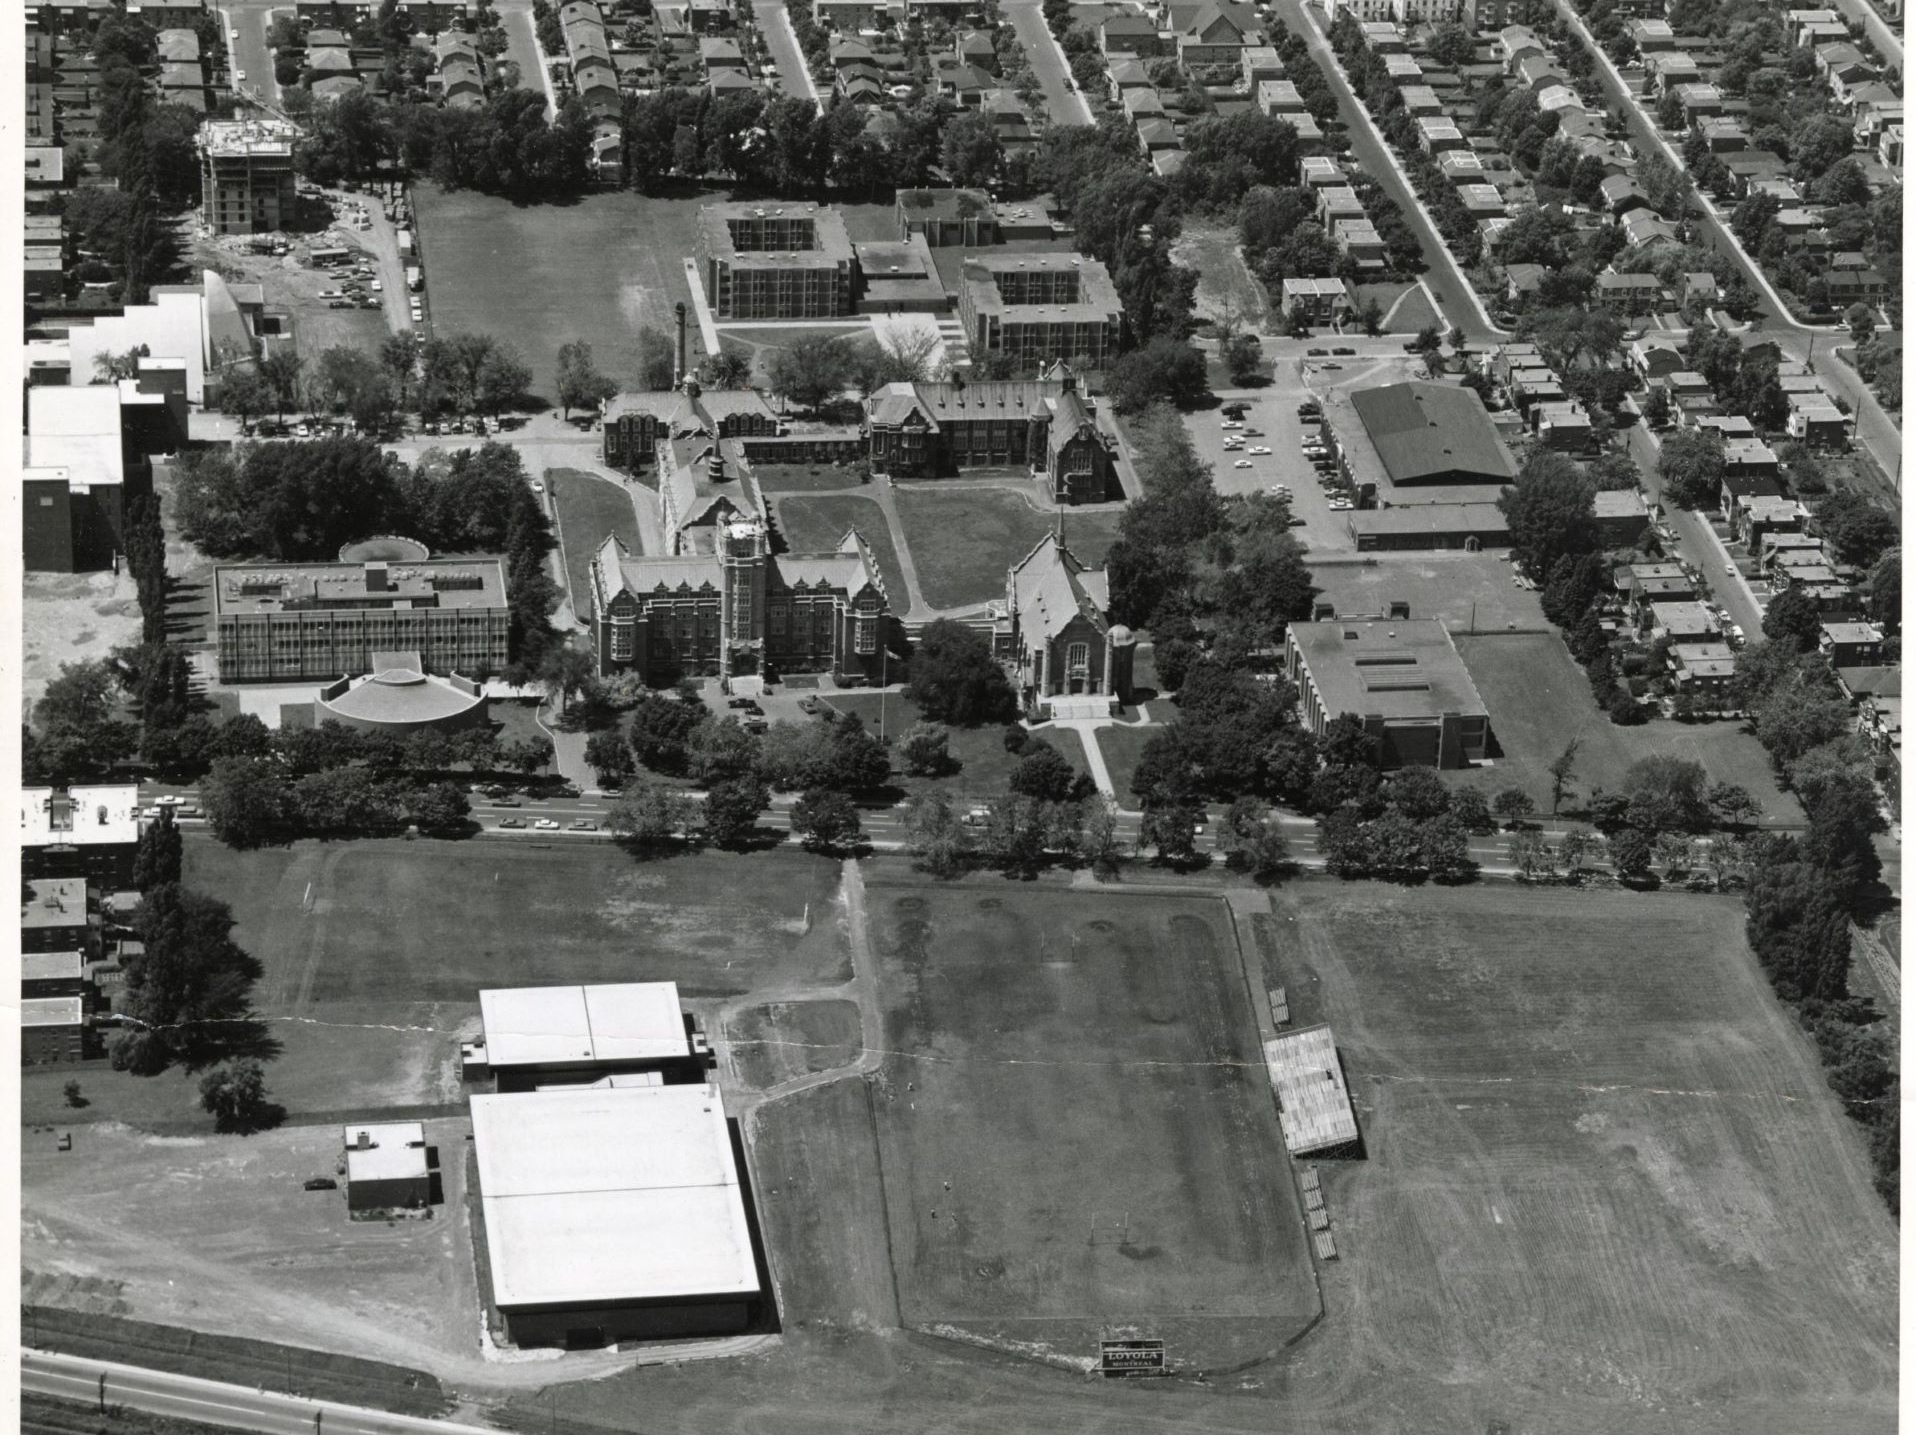 An aerial black and white photo of a campus with several buildings and surrounding residential streets, showing an extensive open area.